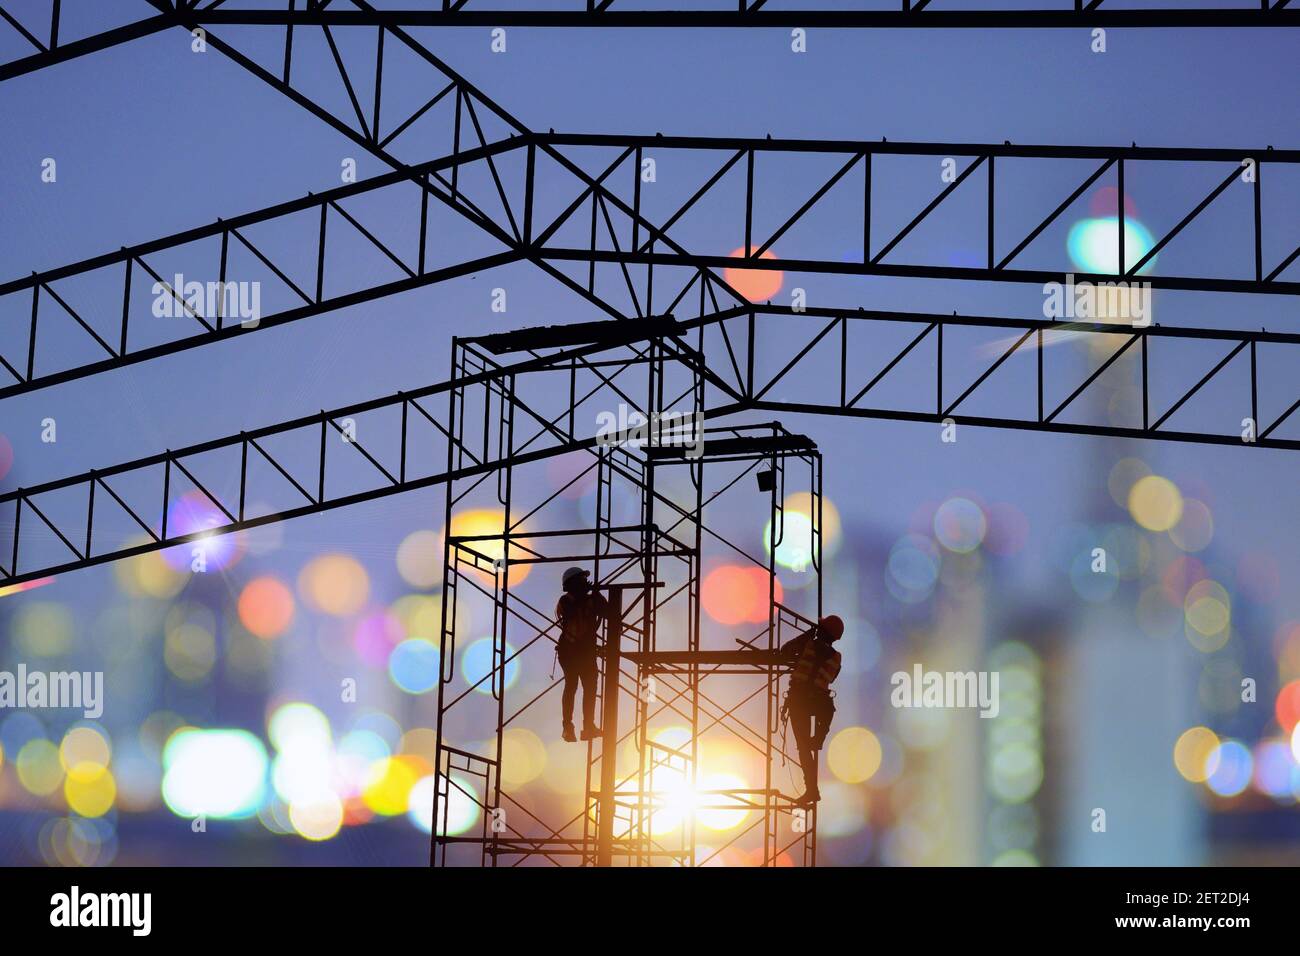 Silhouette of two construction workers climbing scaffolding at night, Thailand Stock Photo